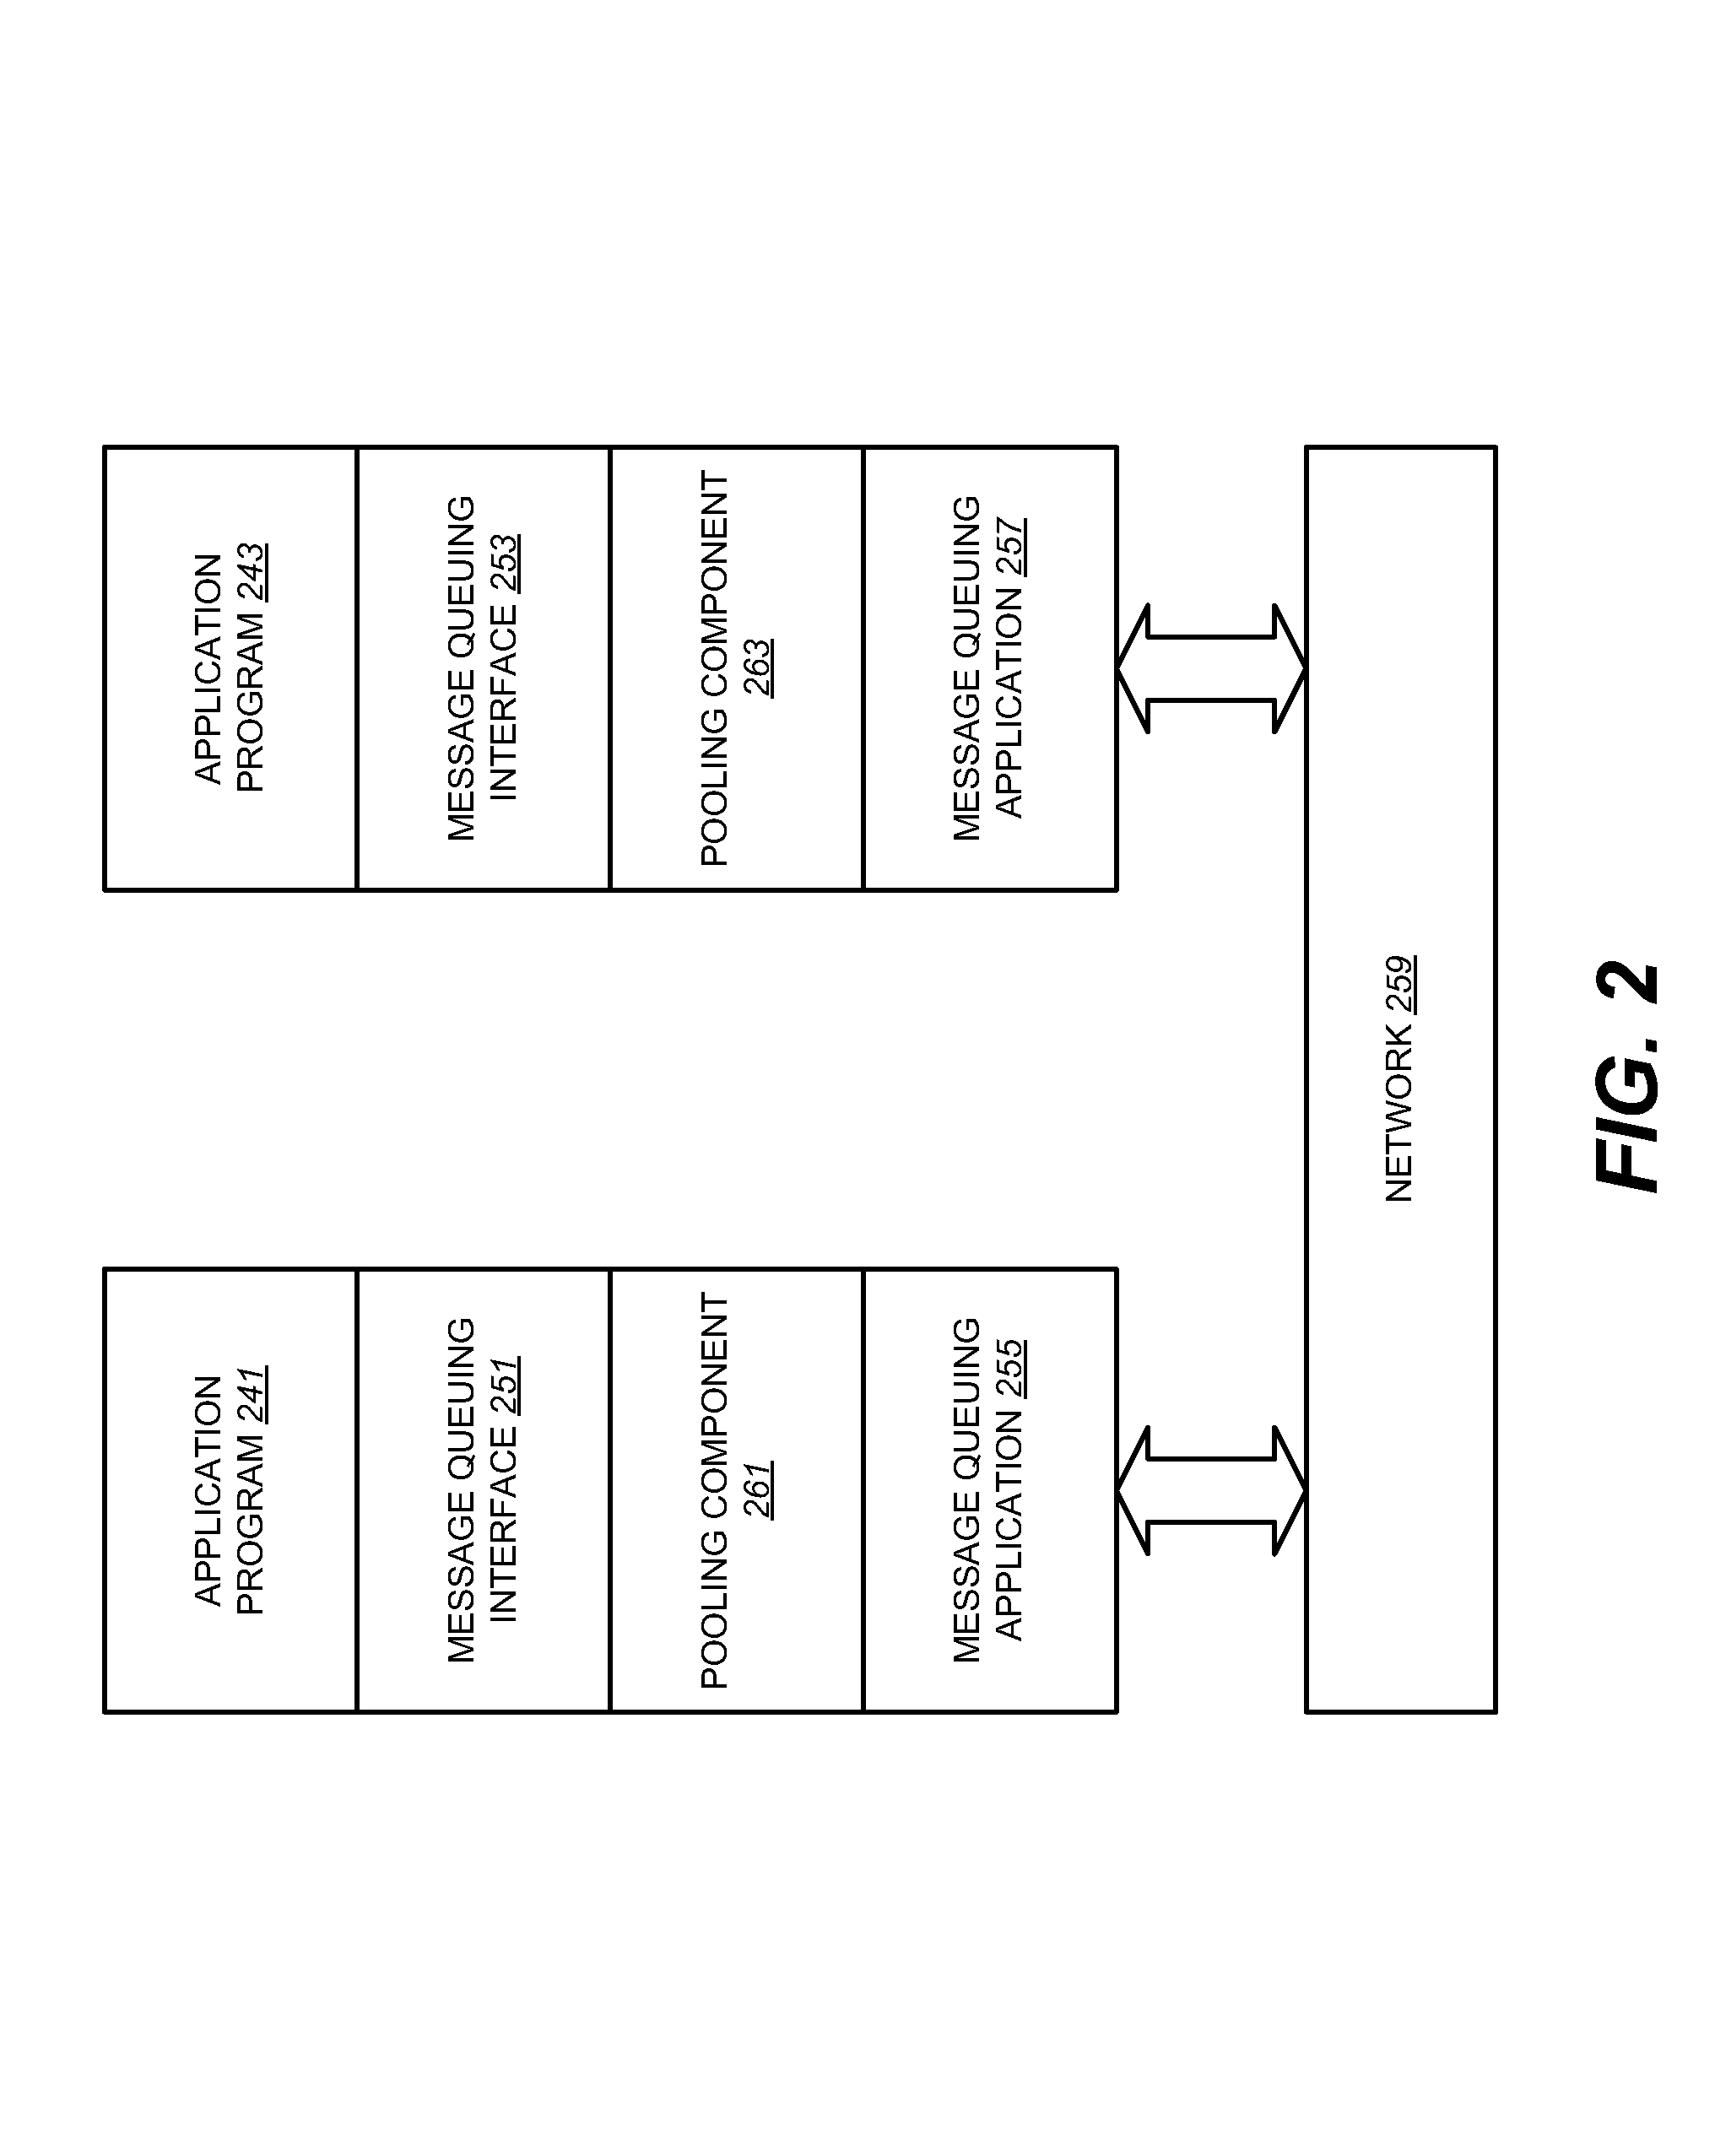 Message queuing method, system, and program product with reusable pooling component